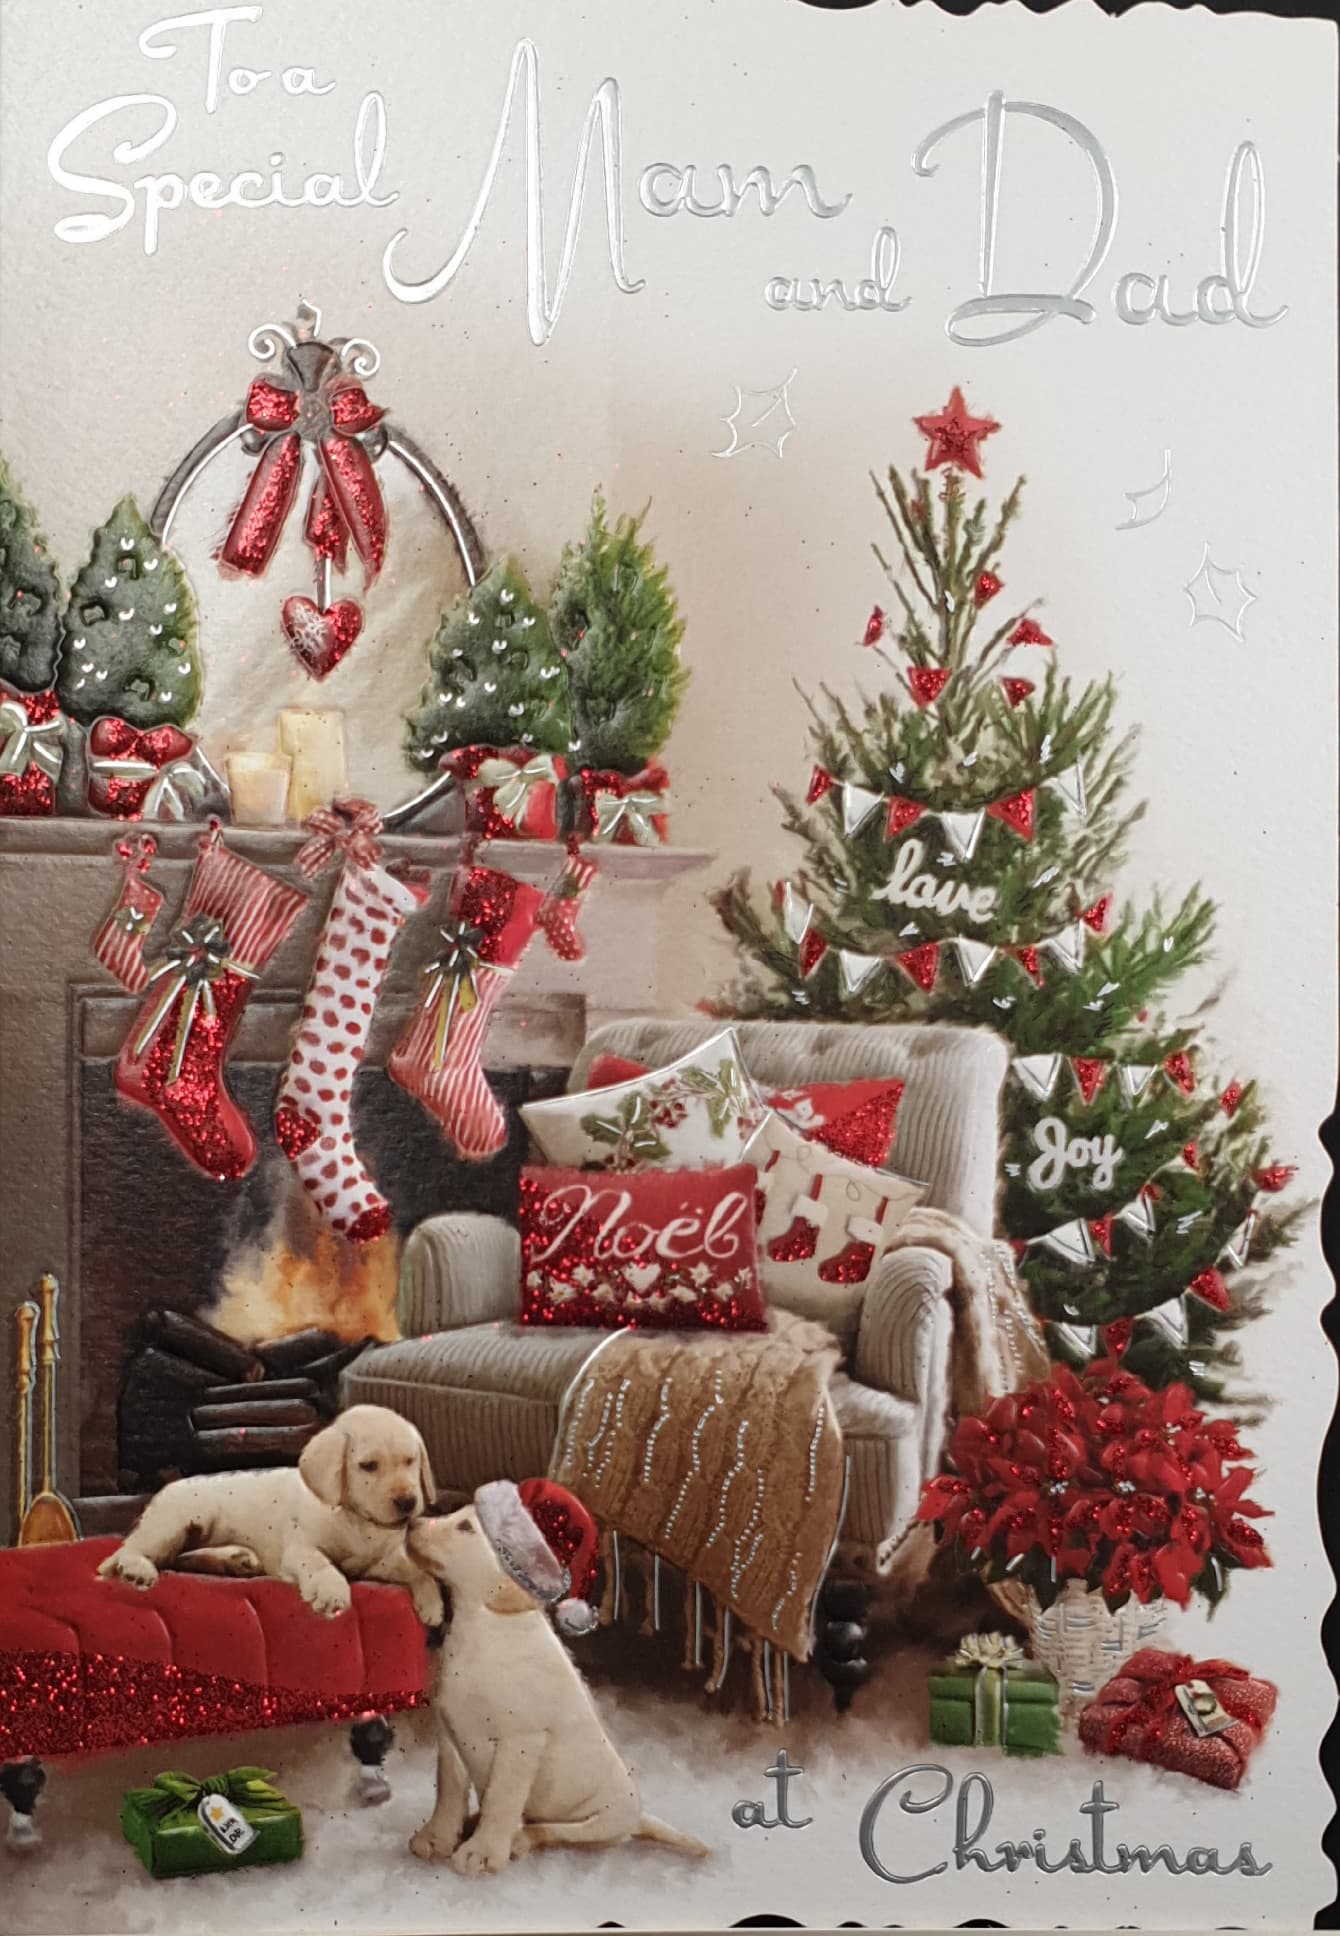 Mam and Dad Christmas Card - Cute Puppies in Decorated Living Room